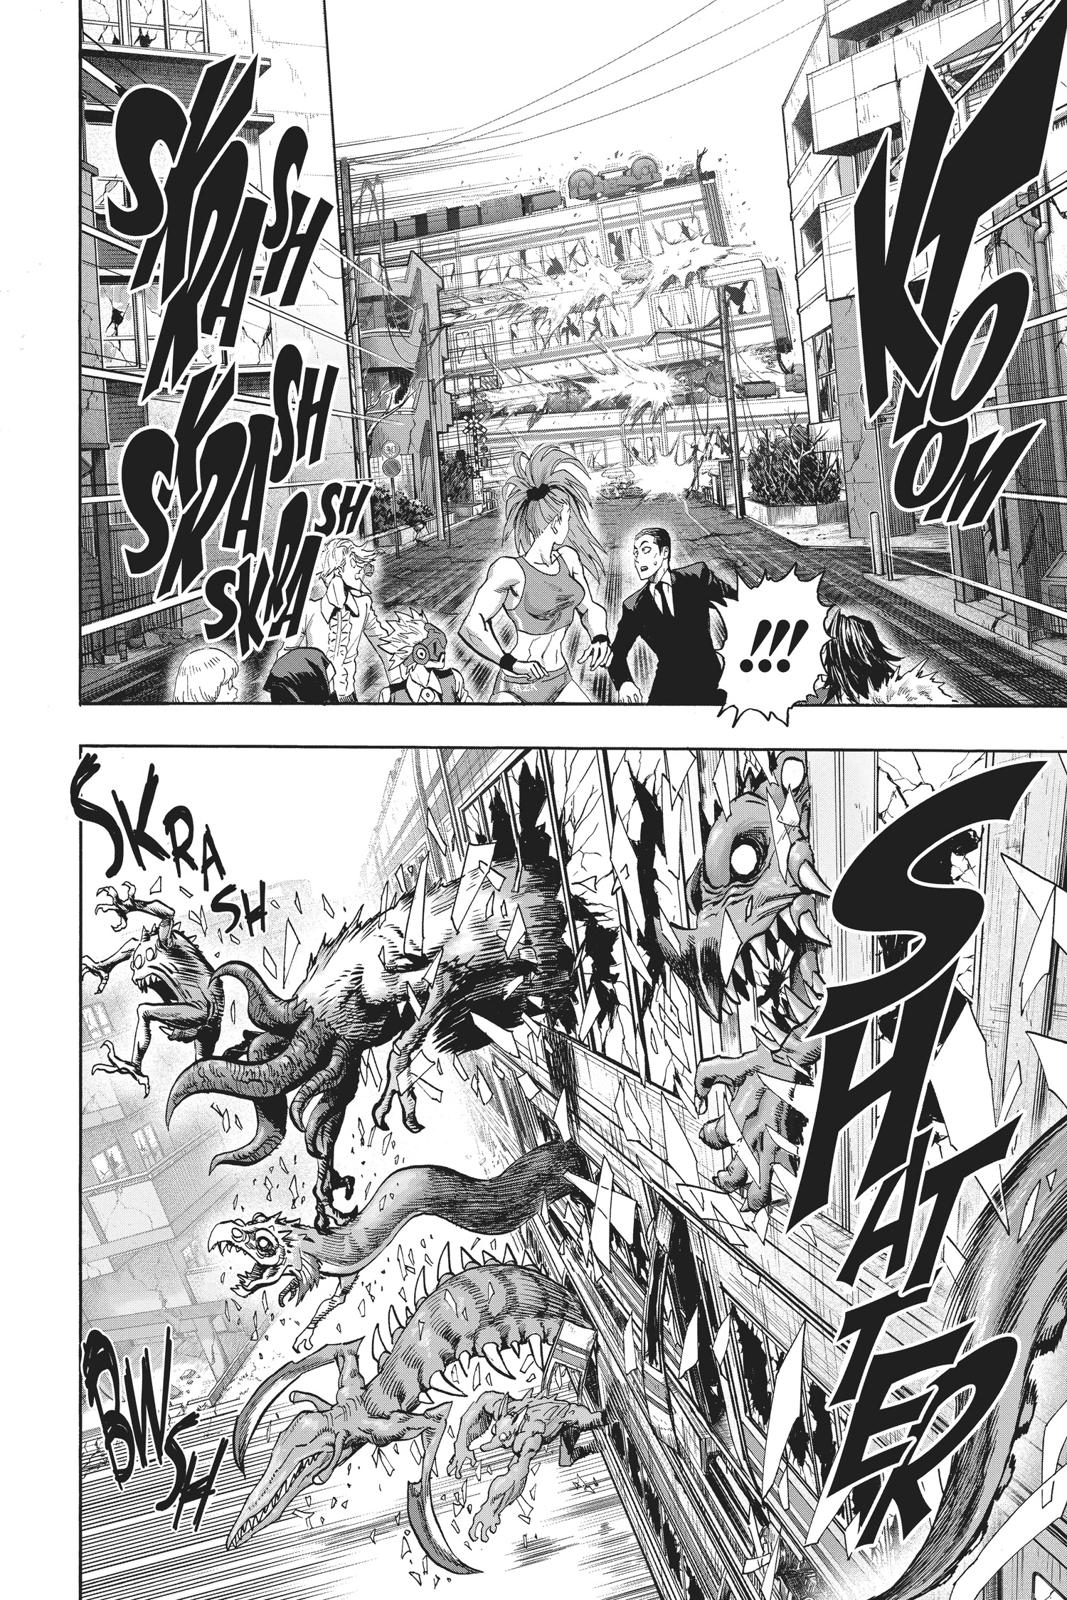 One-Punch Man, Punch 96 image 010